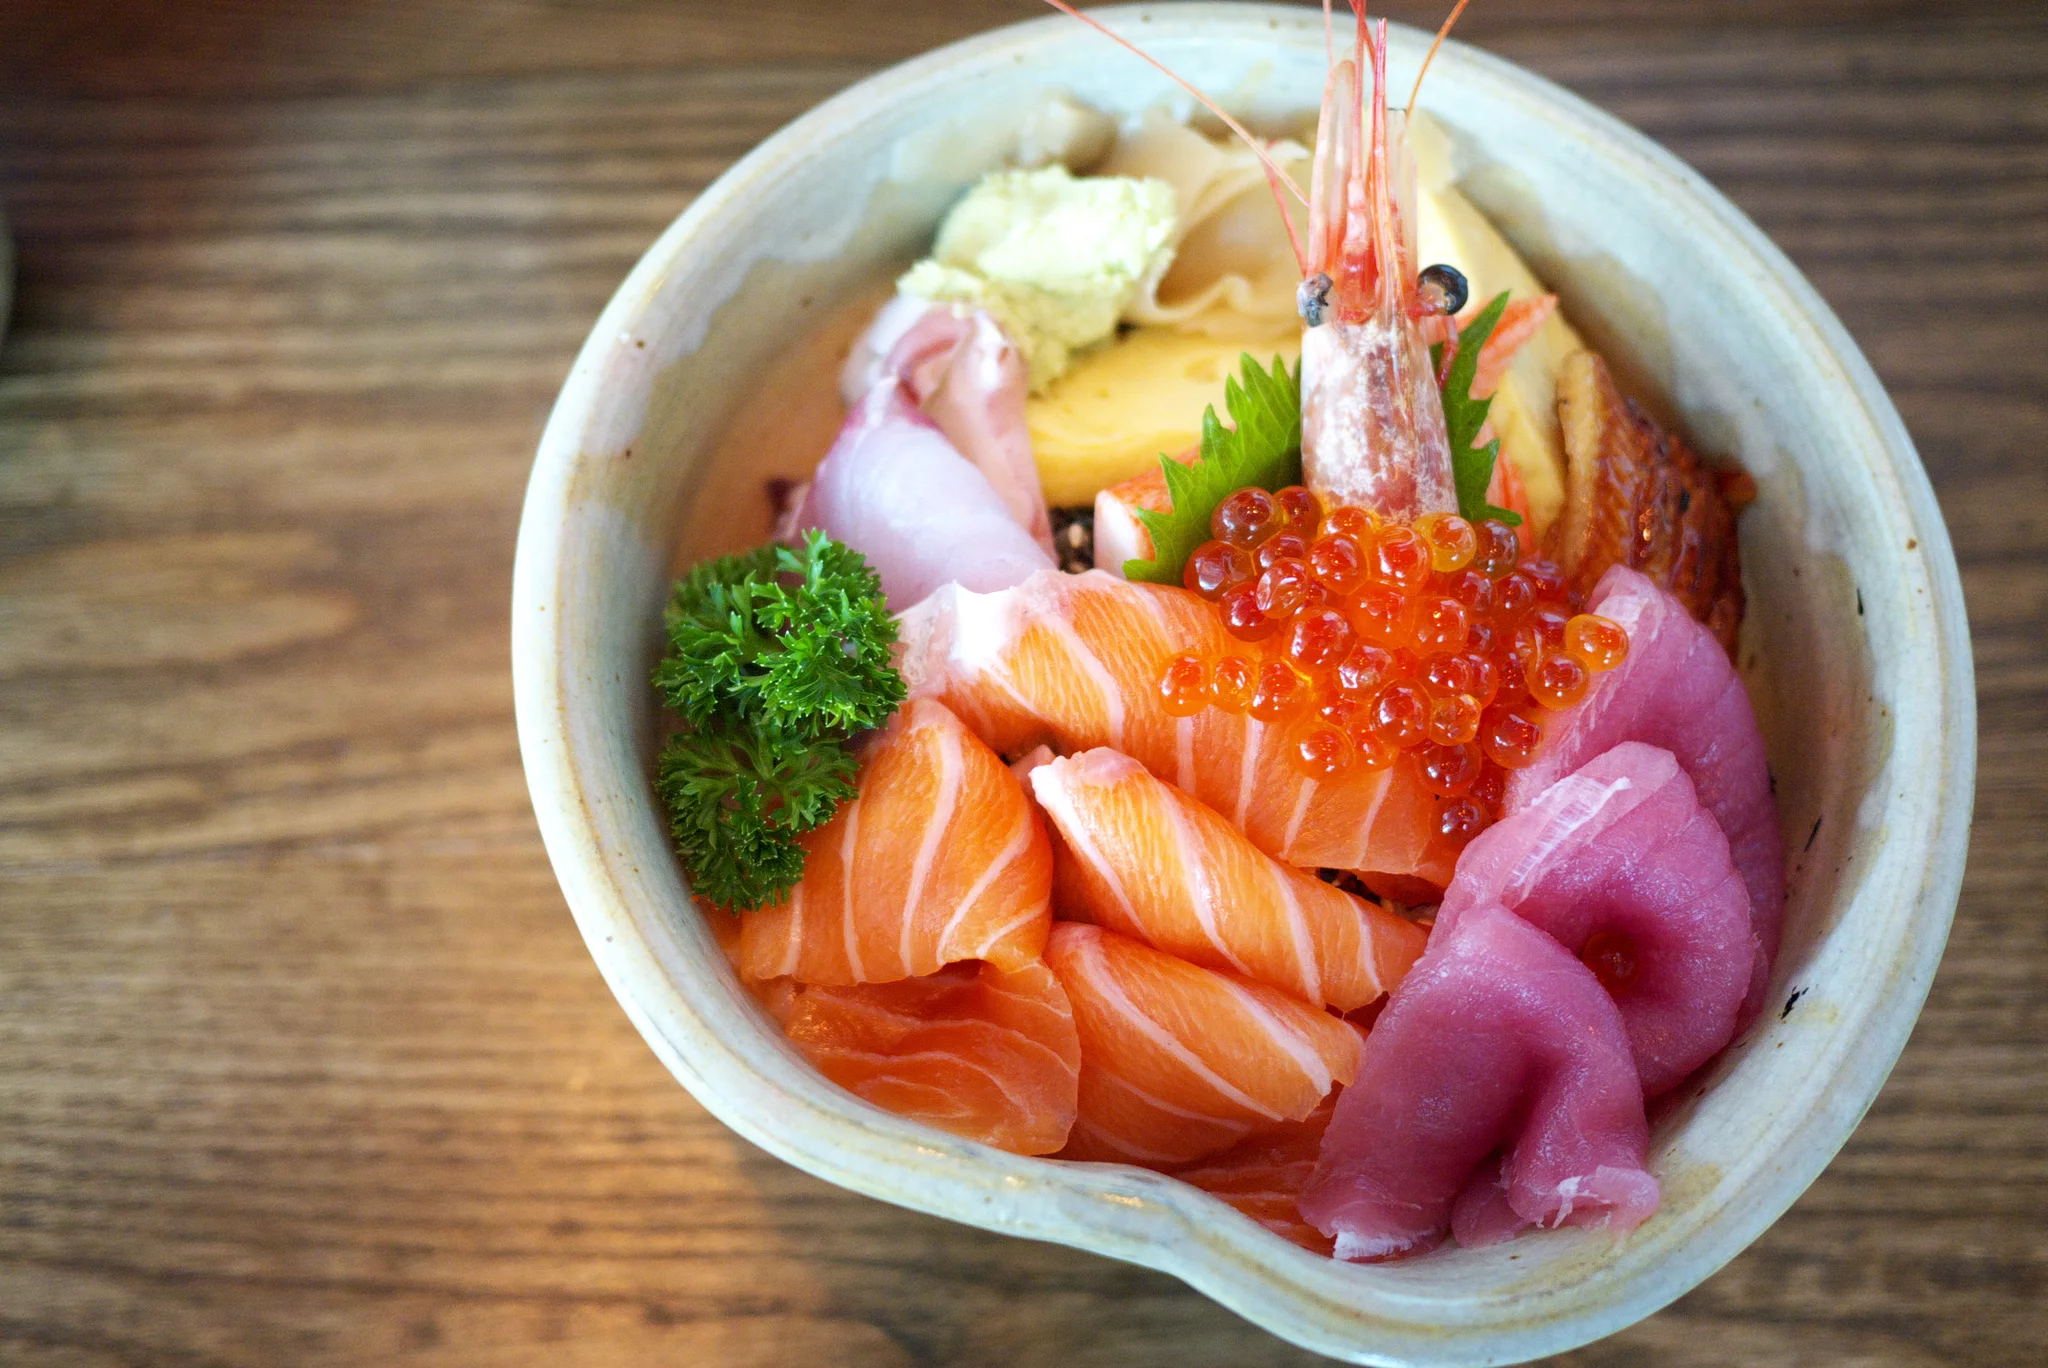 What is the term for sushi that uses vegetable or cooked ingredients instead of raw fish?